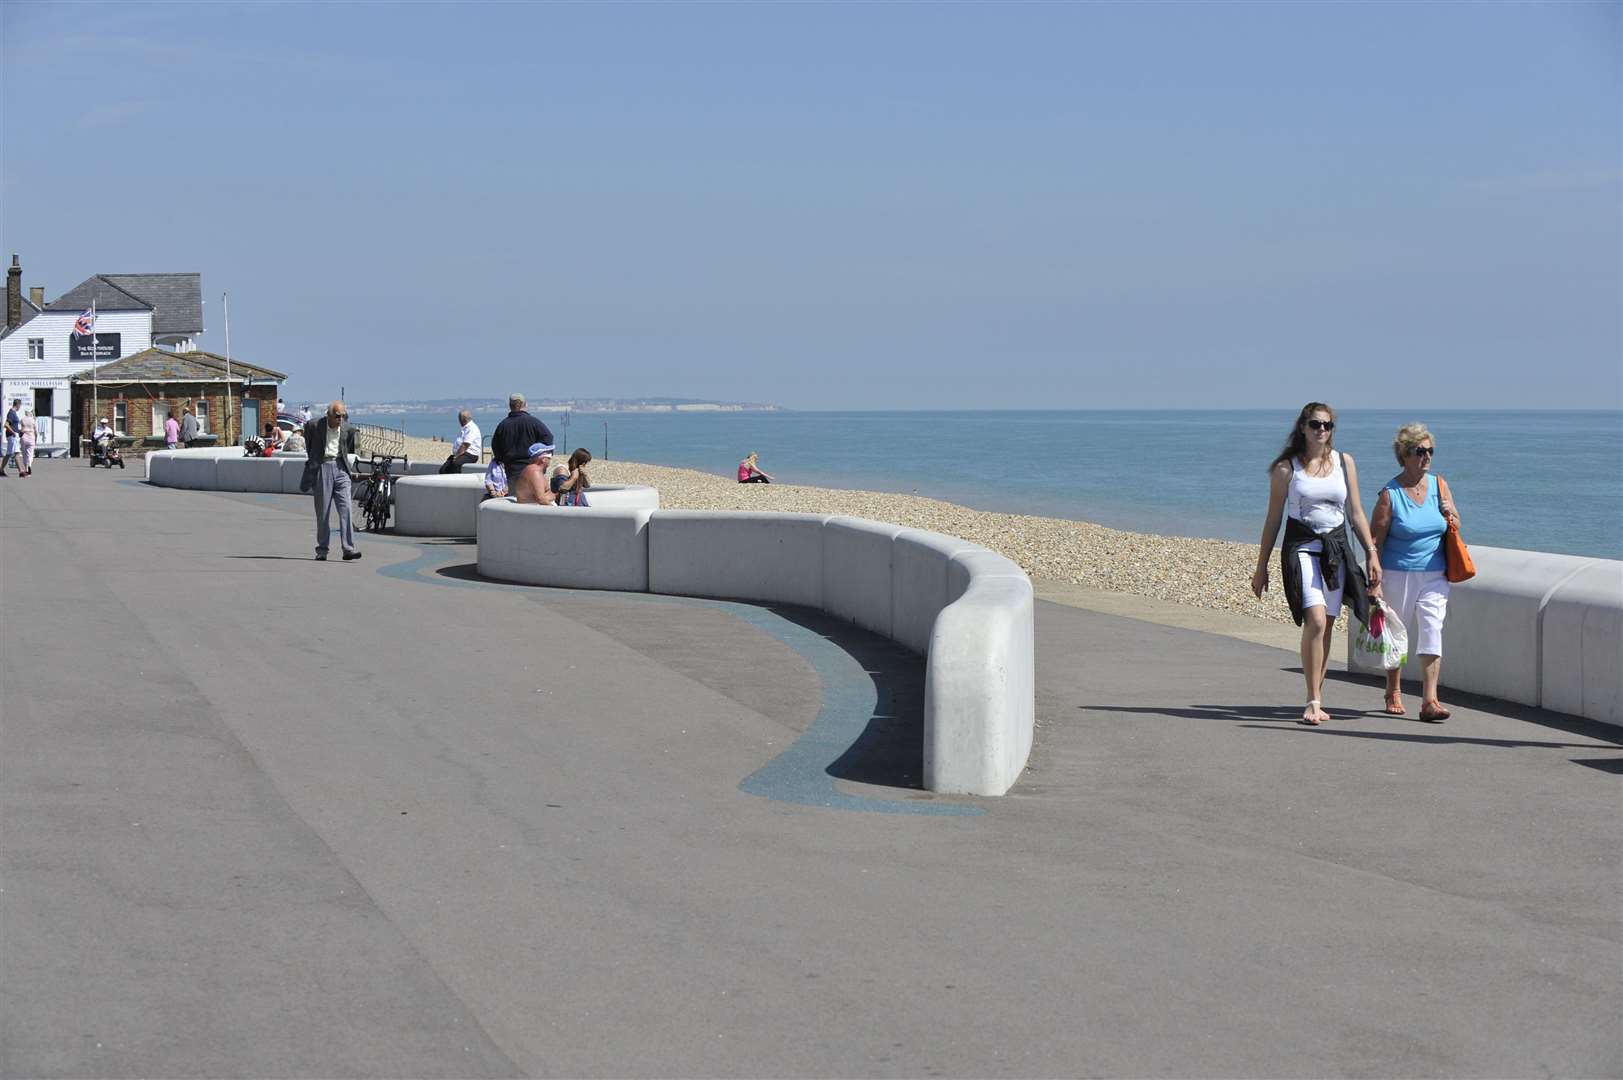 Deal seafront, pictured on a sunny summer's day in 2014